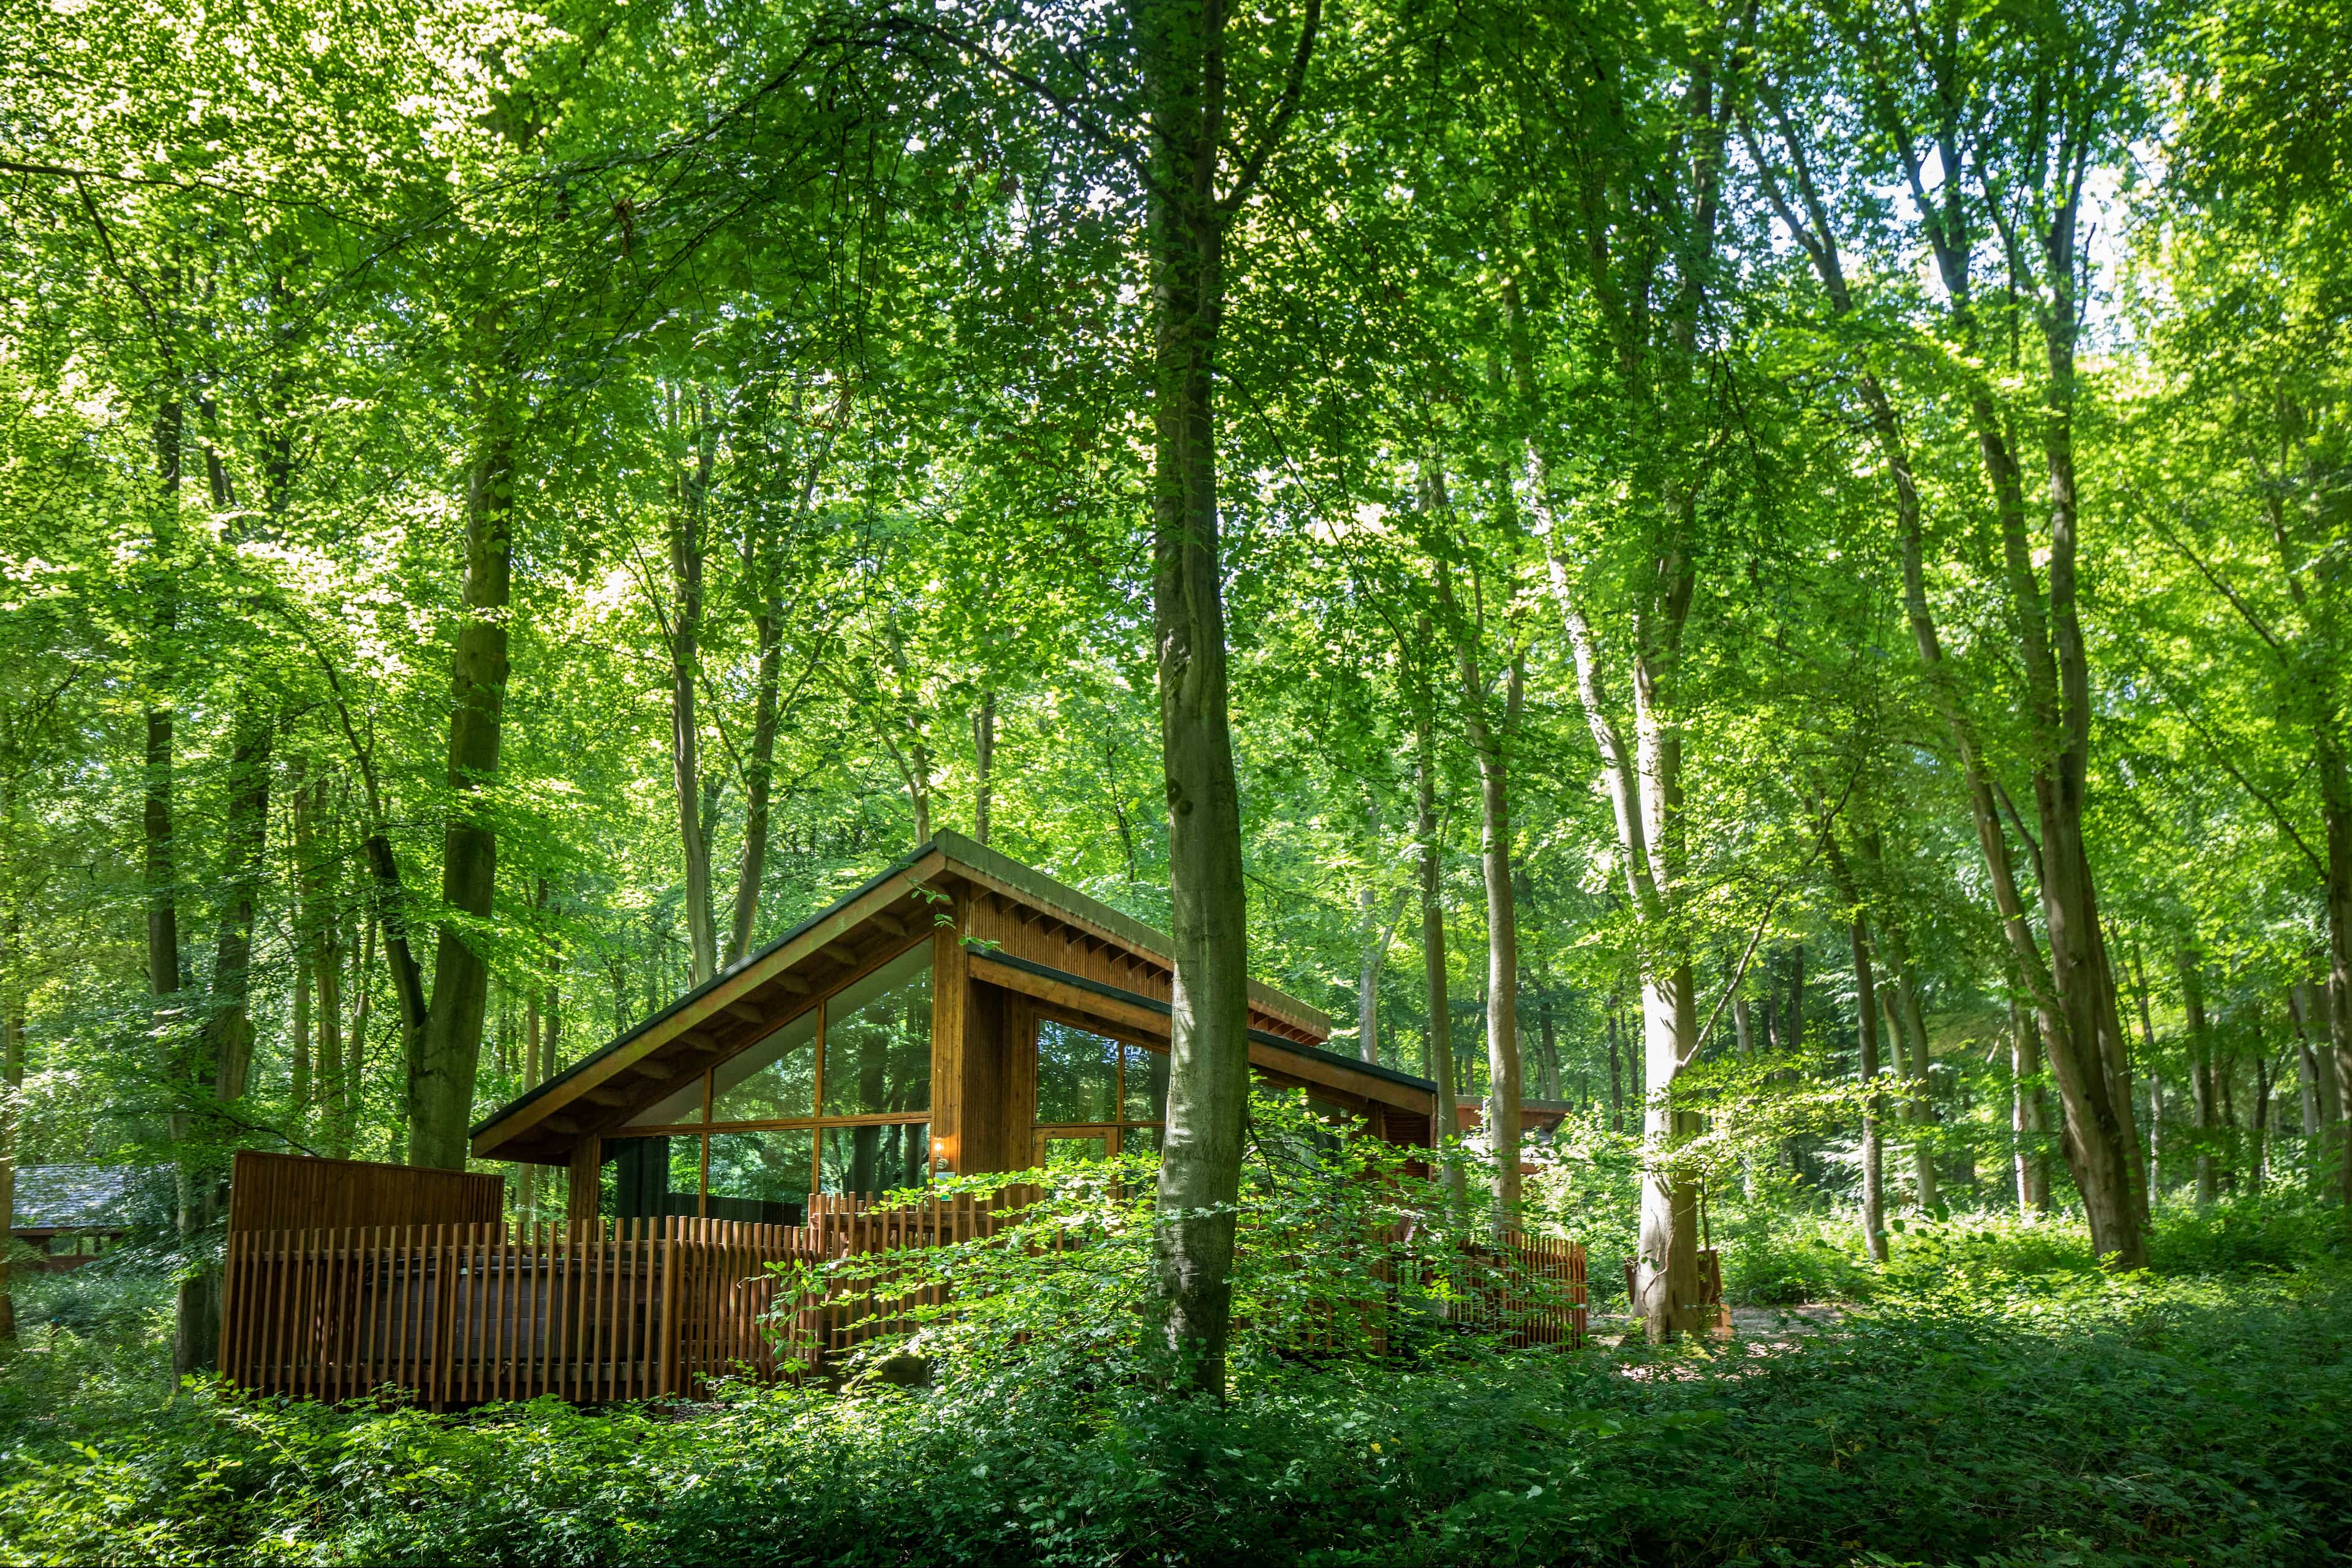 Plan your visit at Blackwood Forest, Hampshire